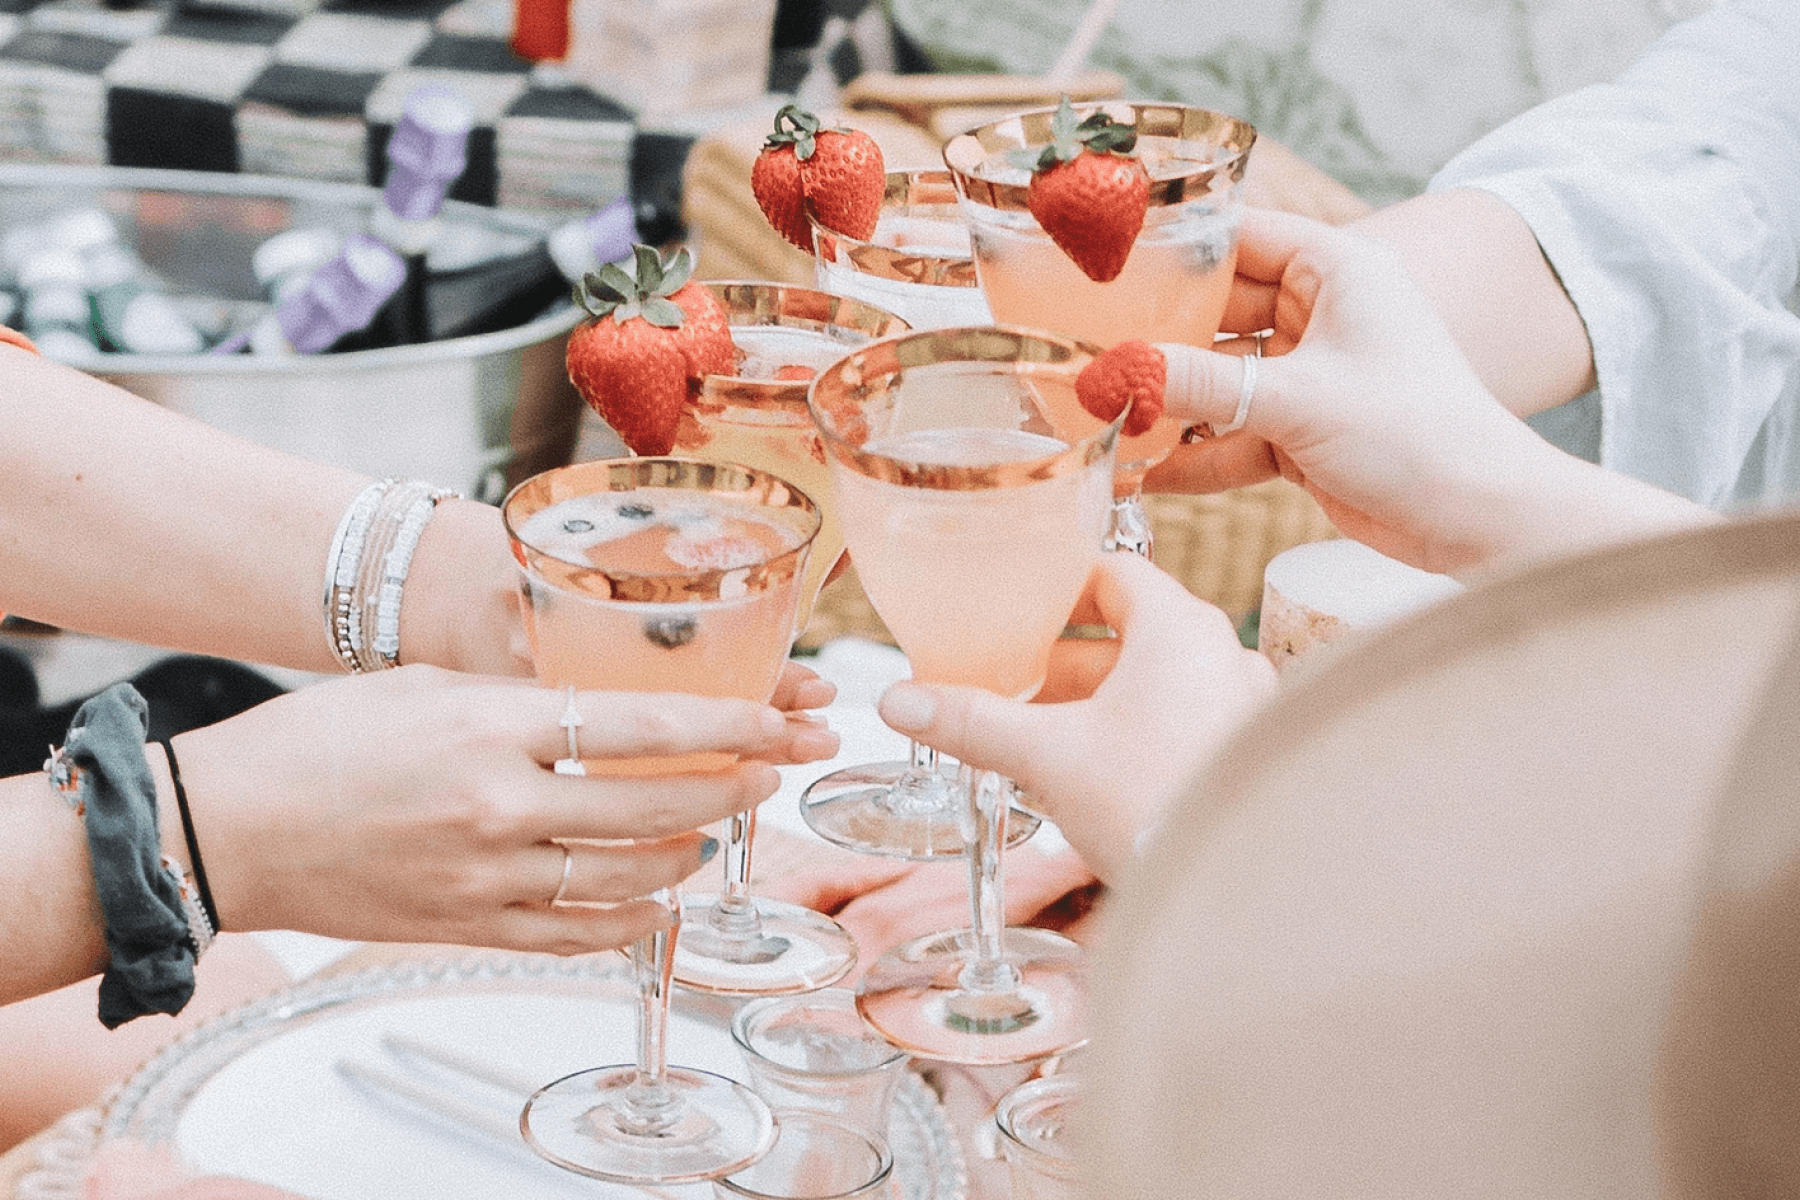 5 hands toasting pink cocktails adorned with berries over a nicely set table.